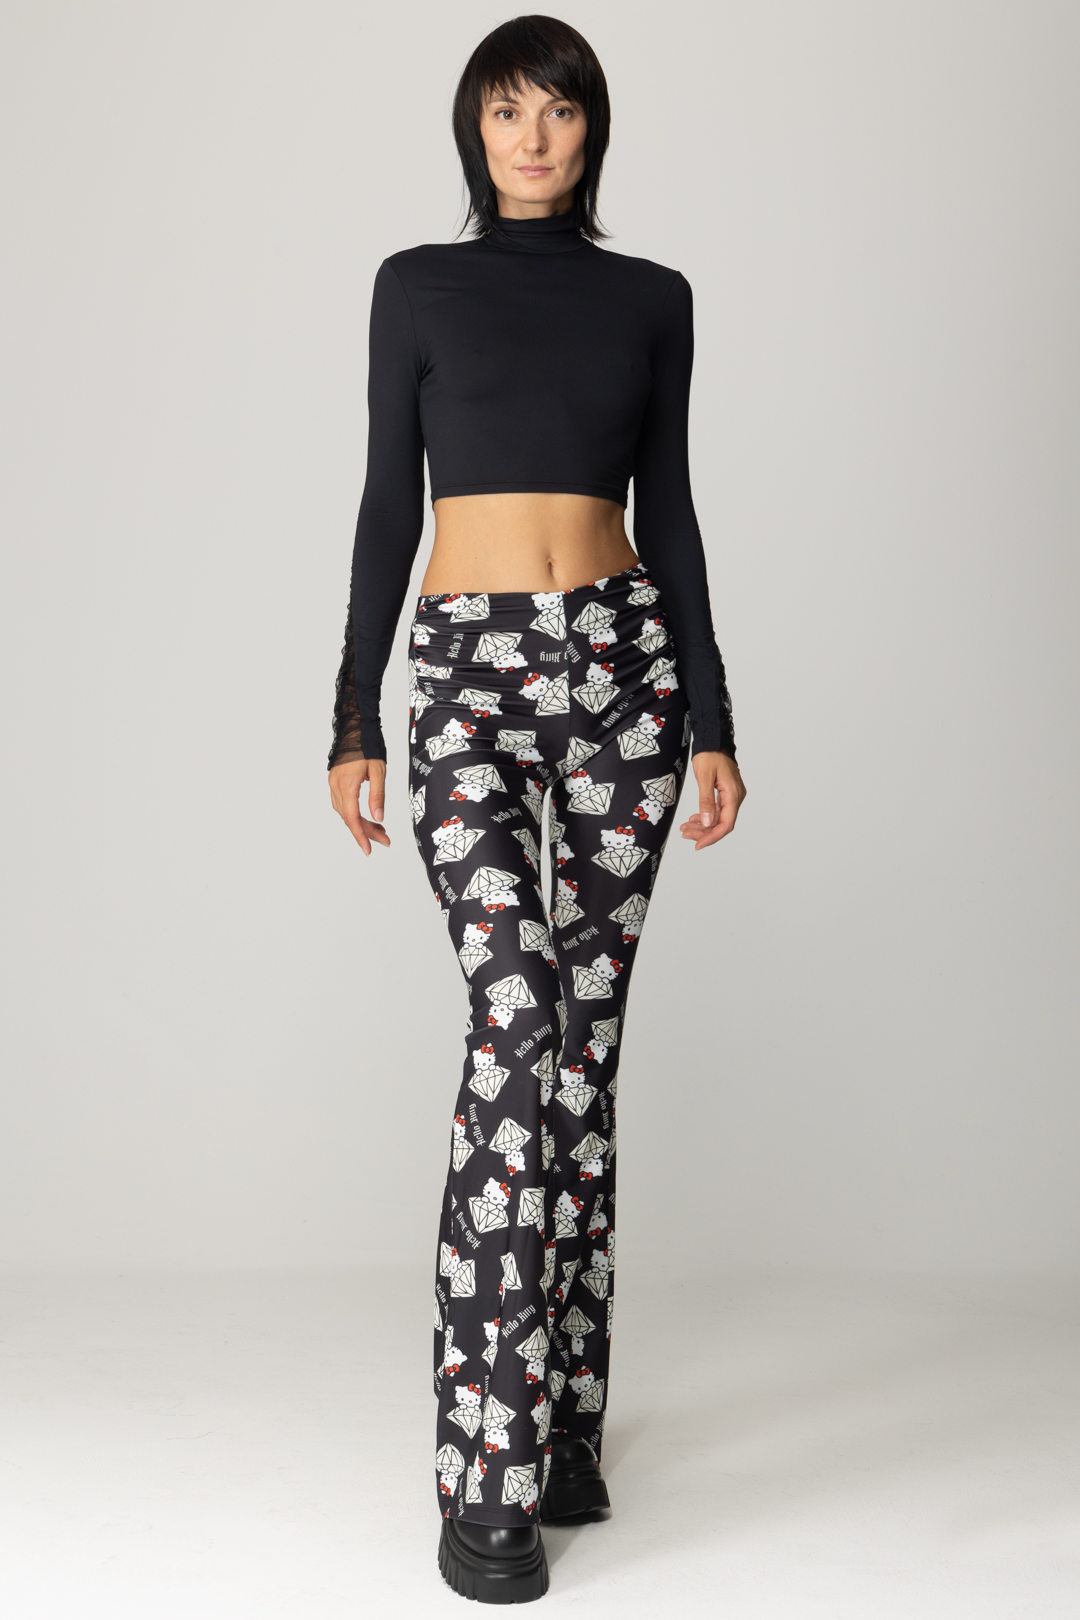 Preview: Aniye By Flared trousers with diamond Kitty print DIAMOND KITTY